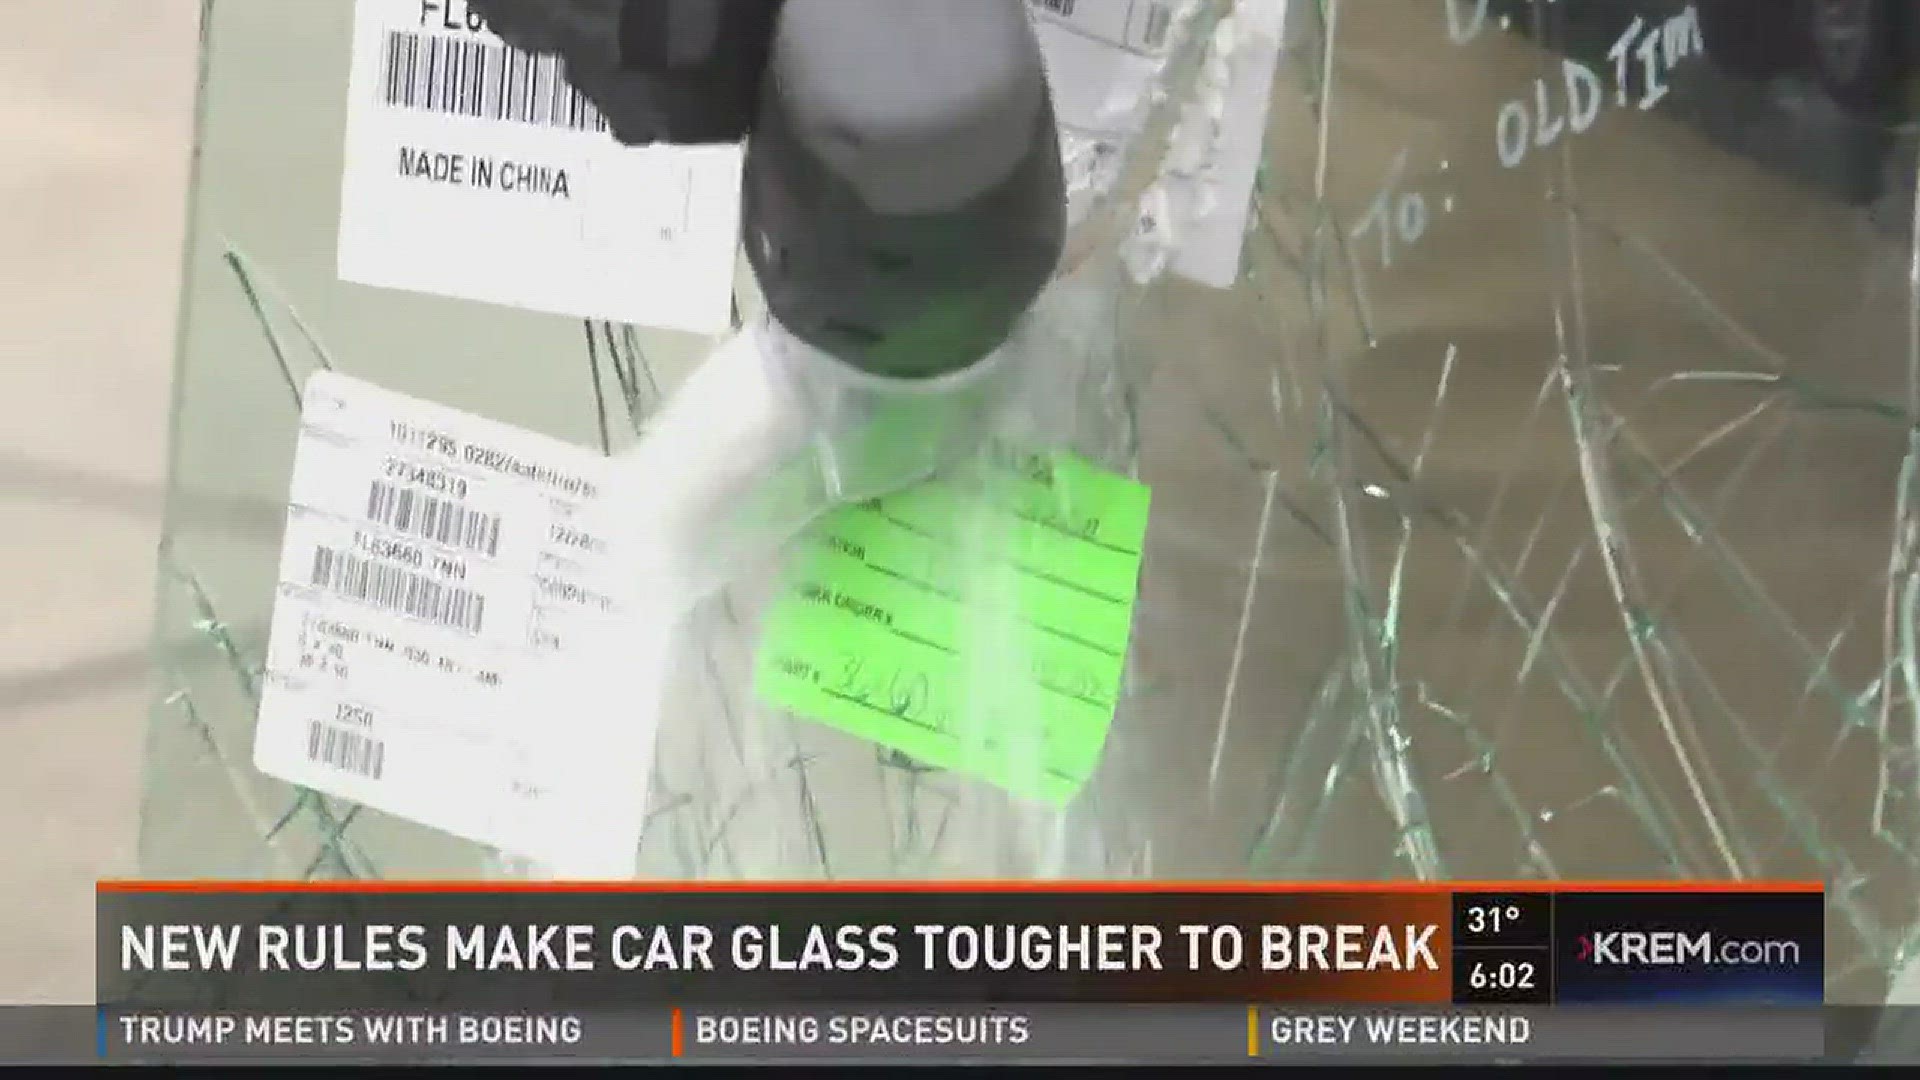 New safety rules make car glass tougher to break